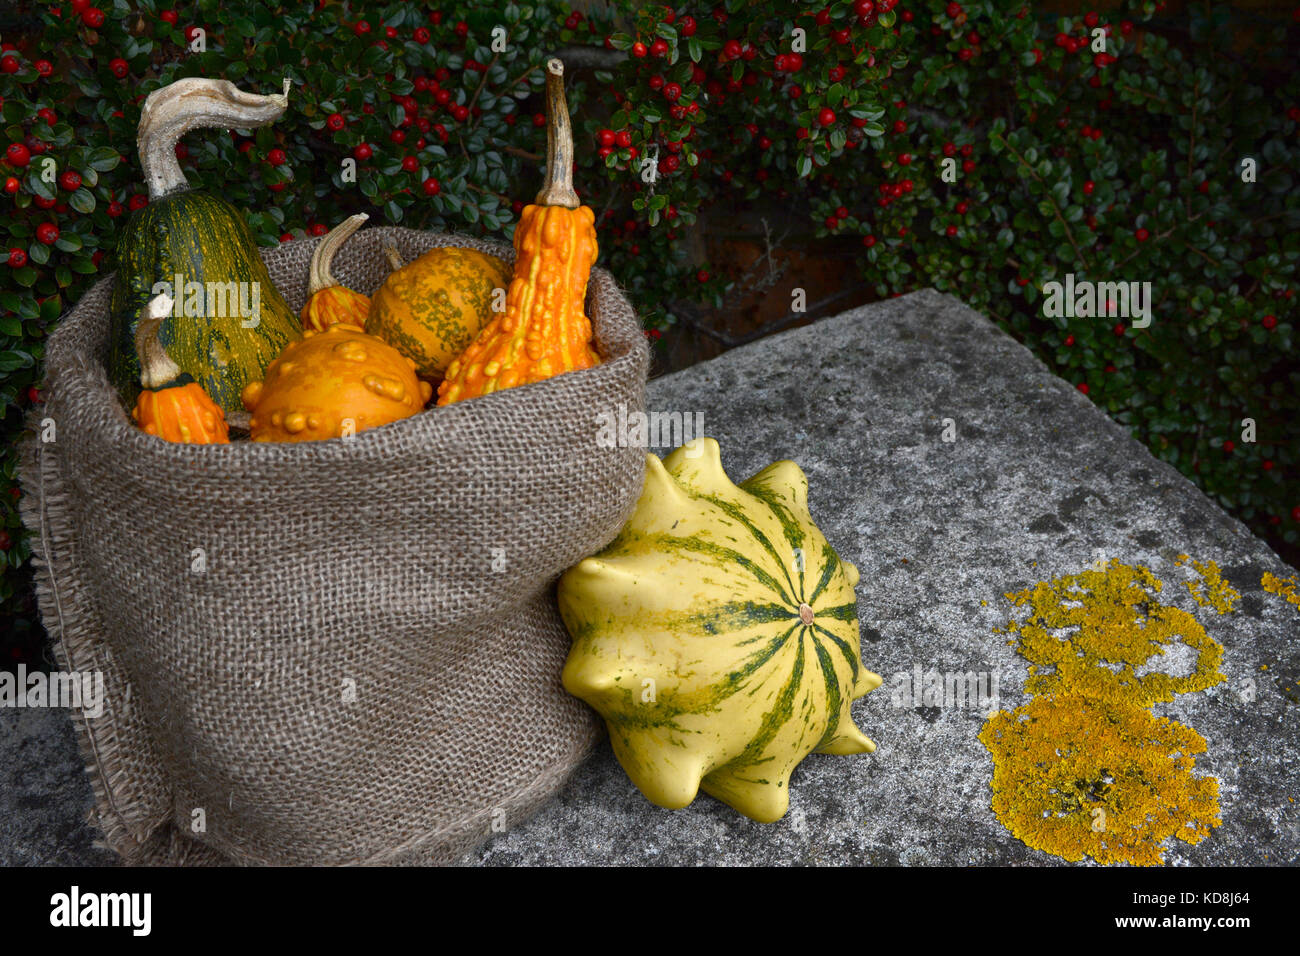 Hessian sack of ornamental gourds on a stone bench with a Crown of Thorns outside. Copy space on lichen-covered seat. Stock Photo